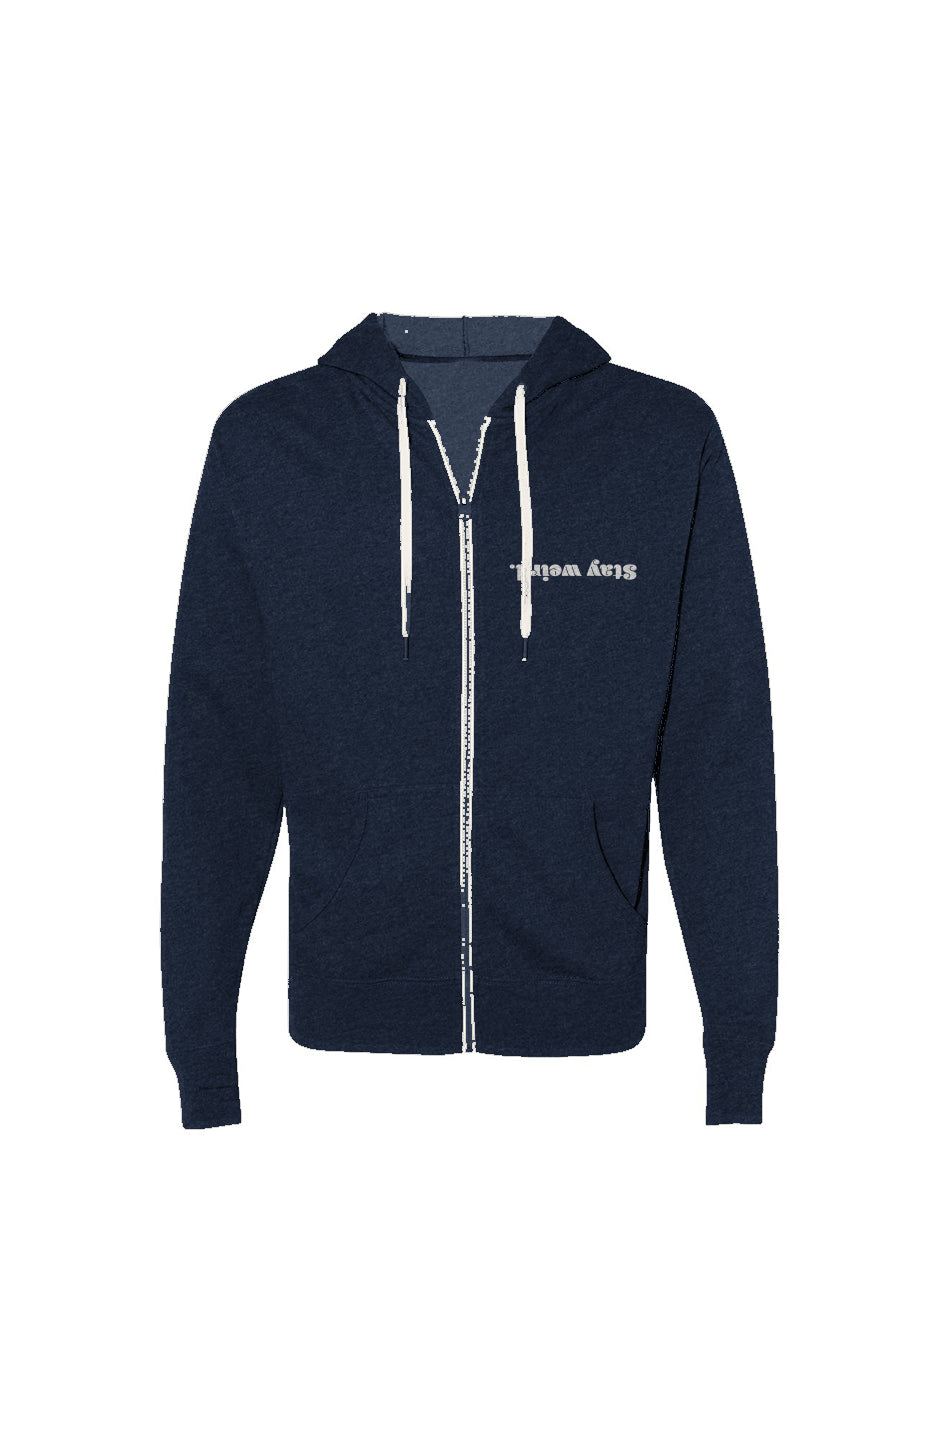 Stay Weird French Terry Zip-Up Hoodie